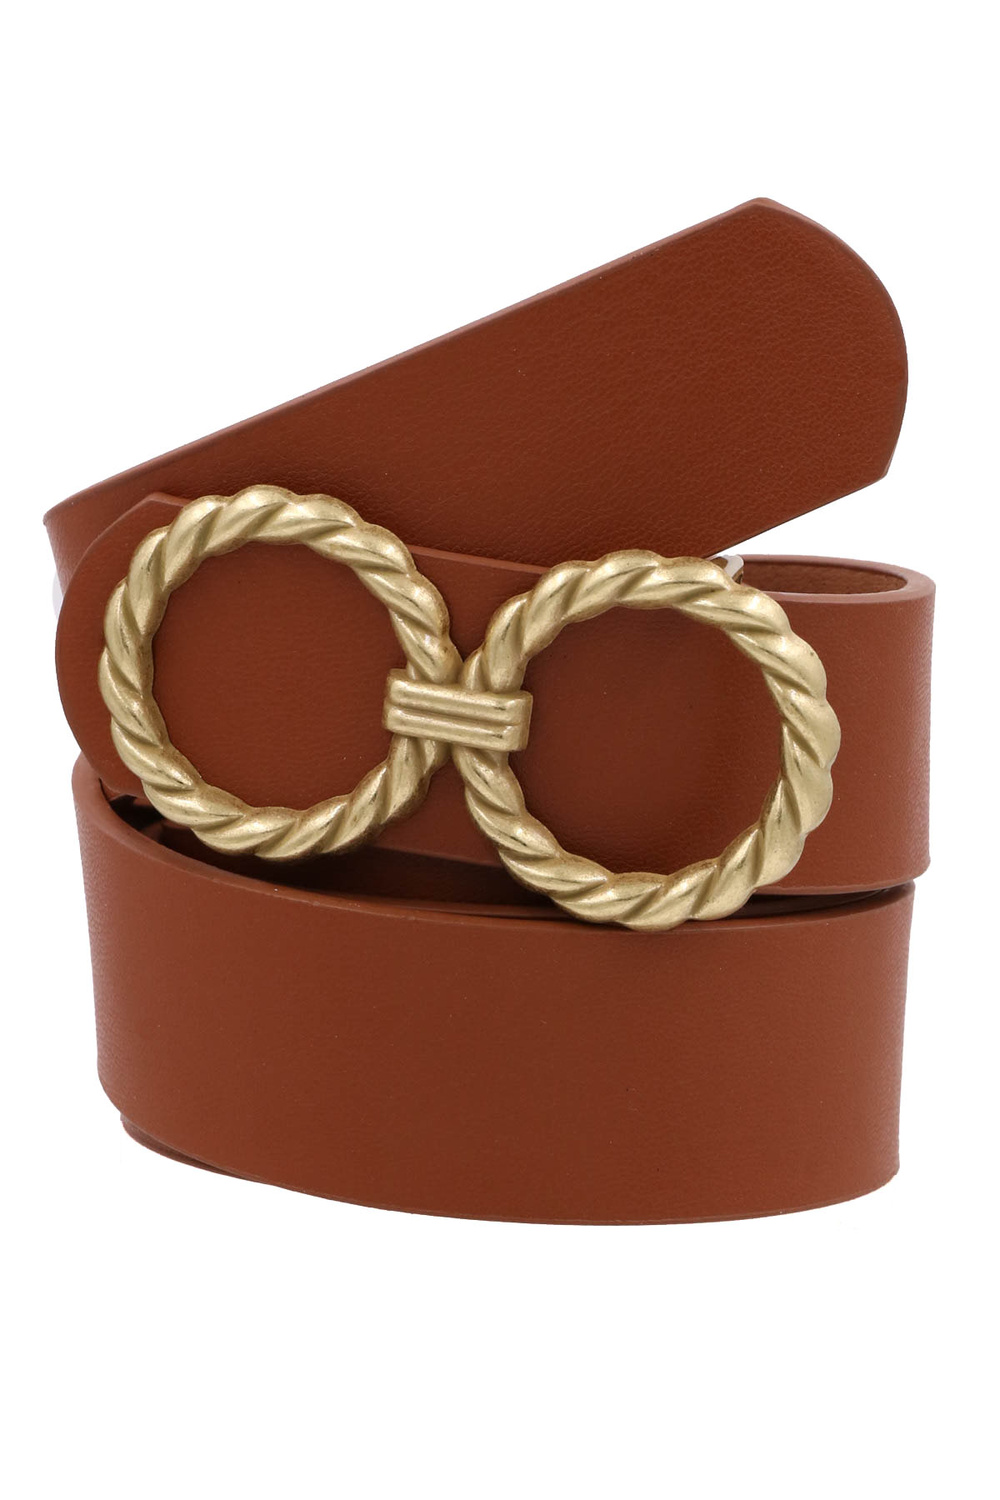 TAUPE Twisted Metal Buckle Belt - Belts